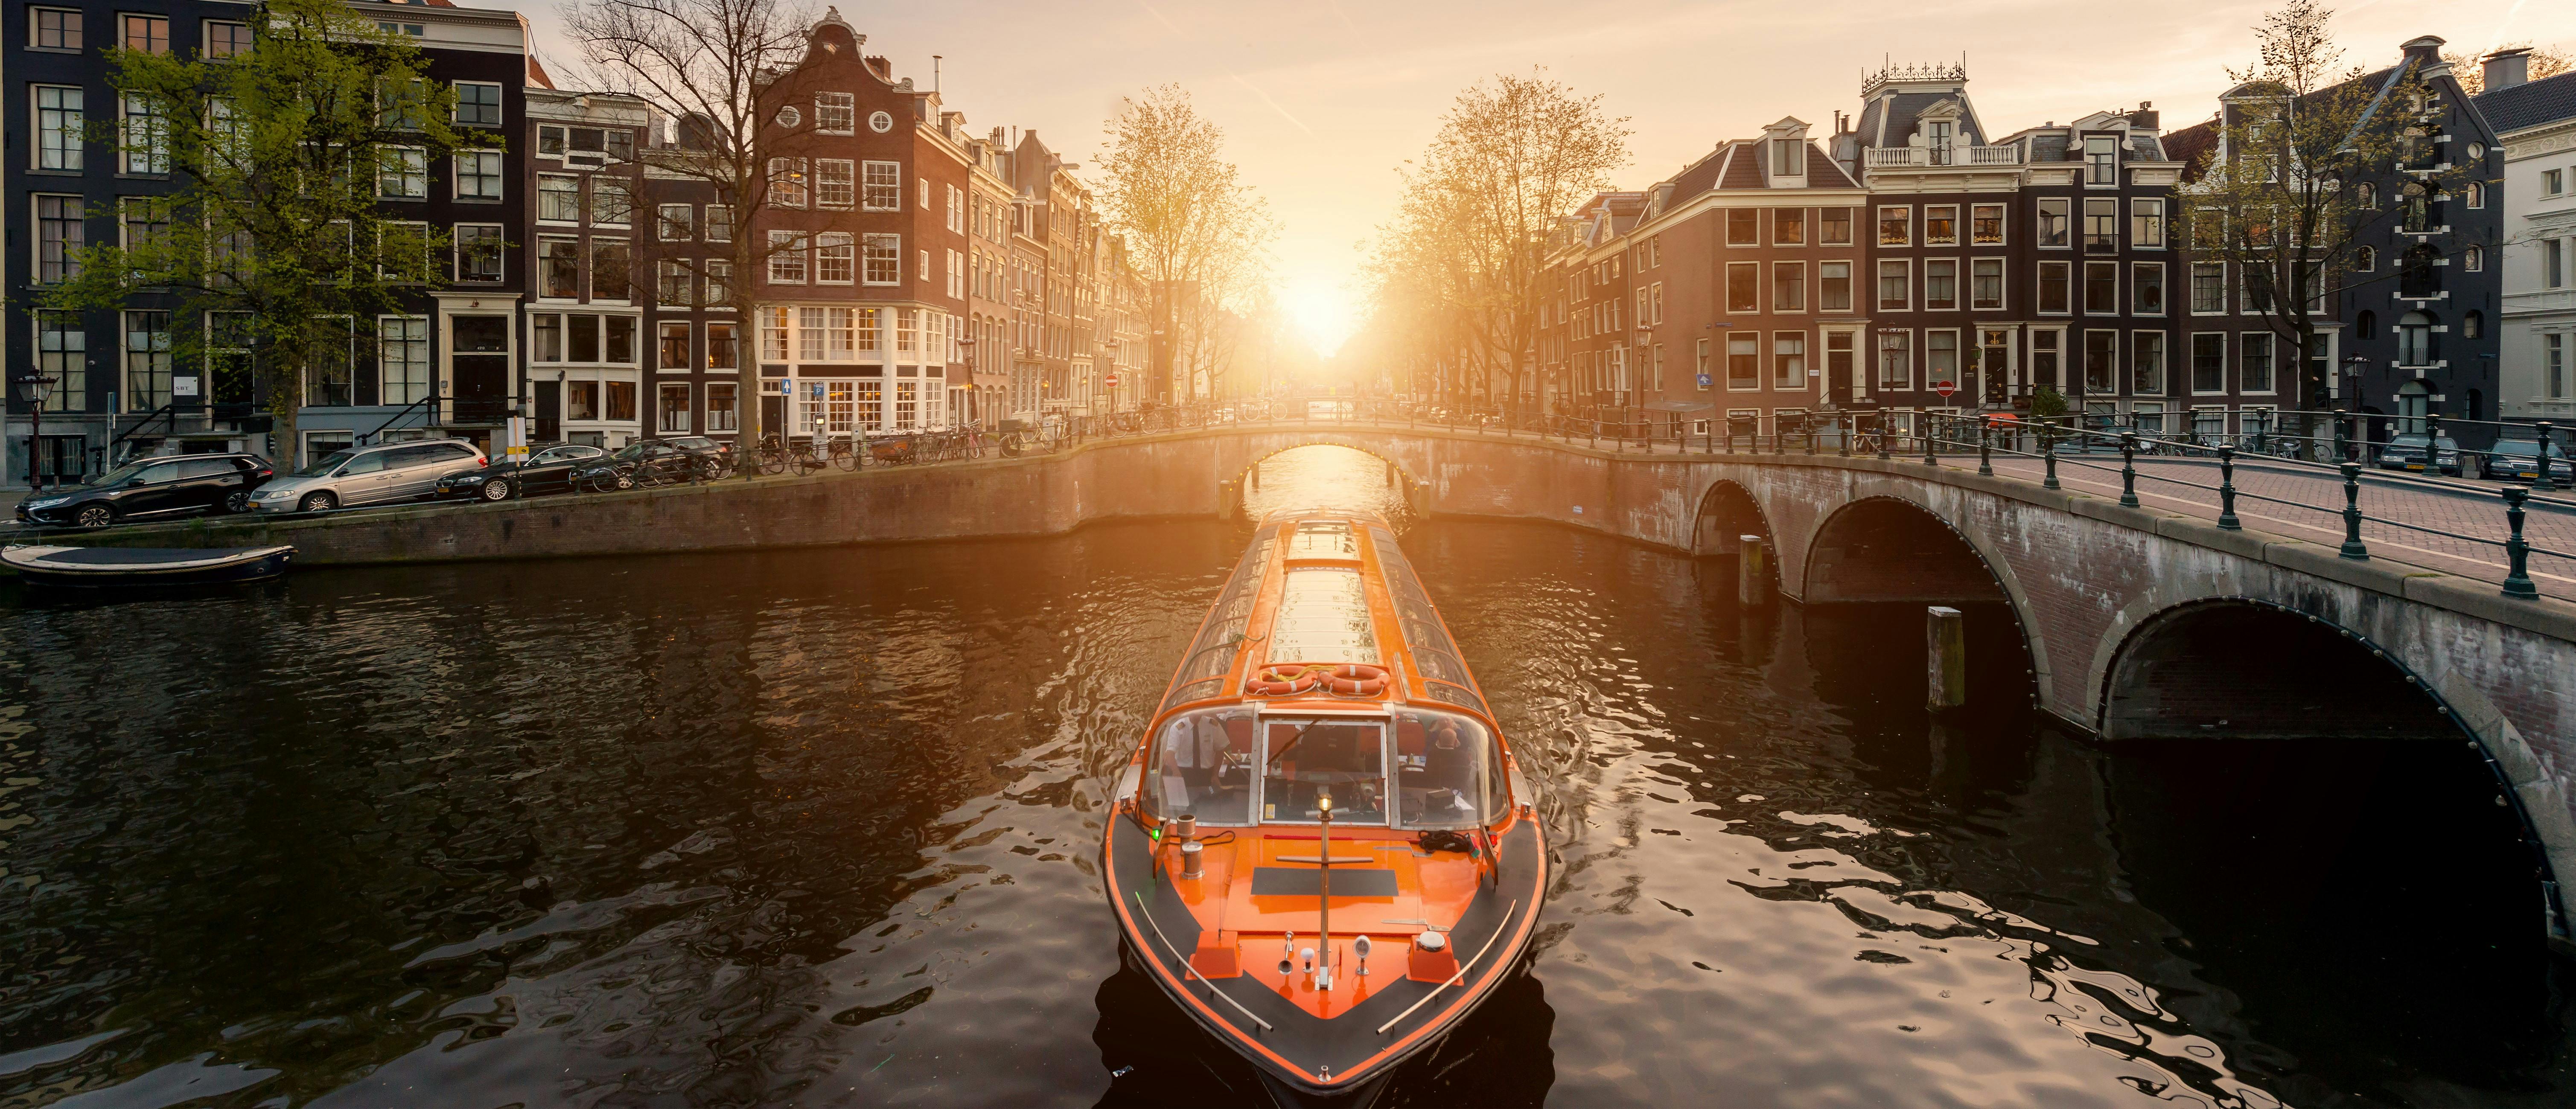 1 or 2-days Amsterdam Nightlife Ticket and Canal Cruise ticket